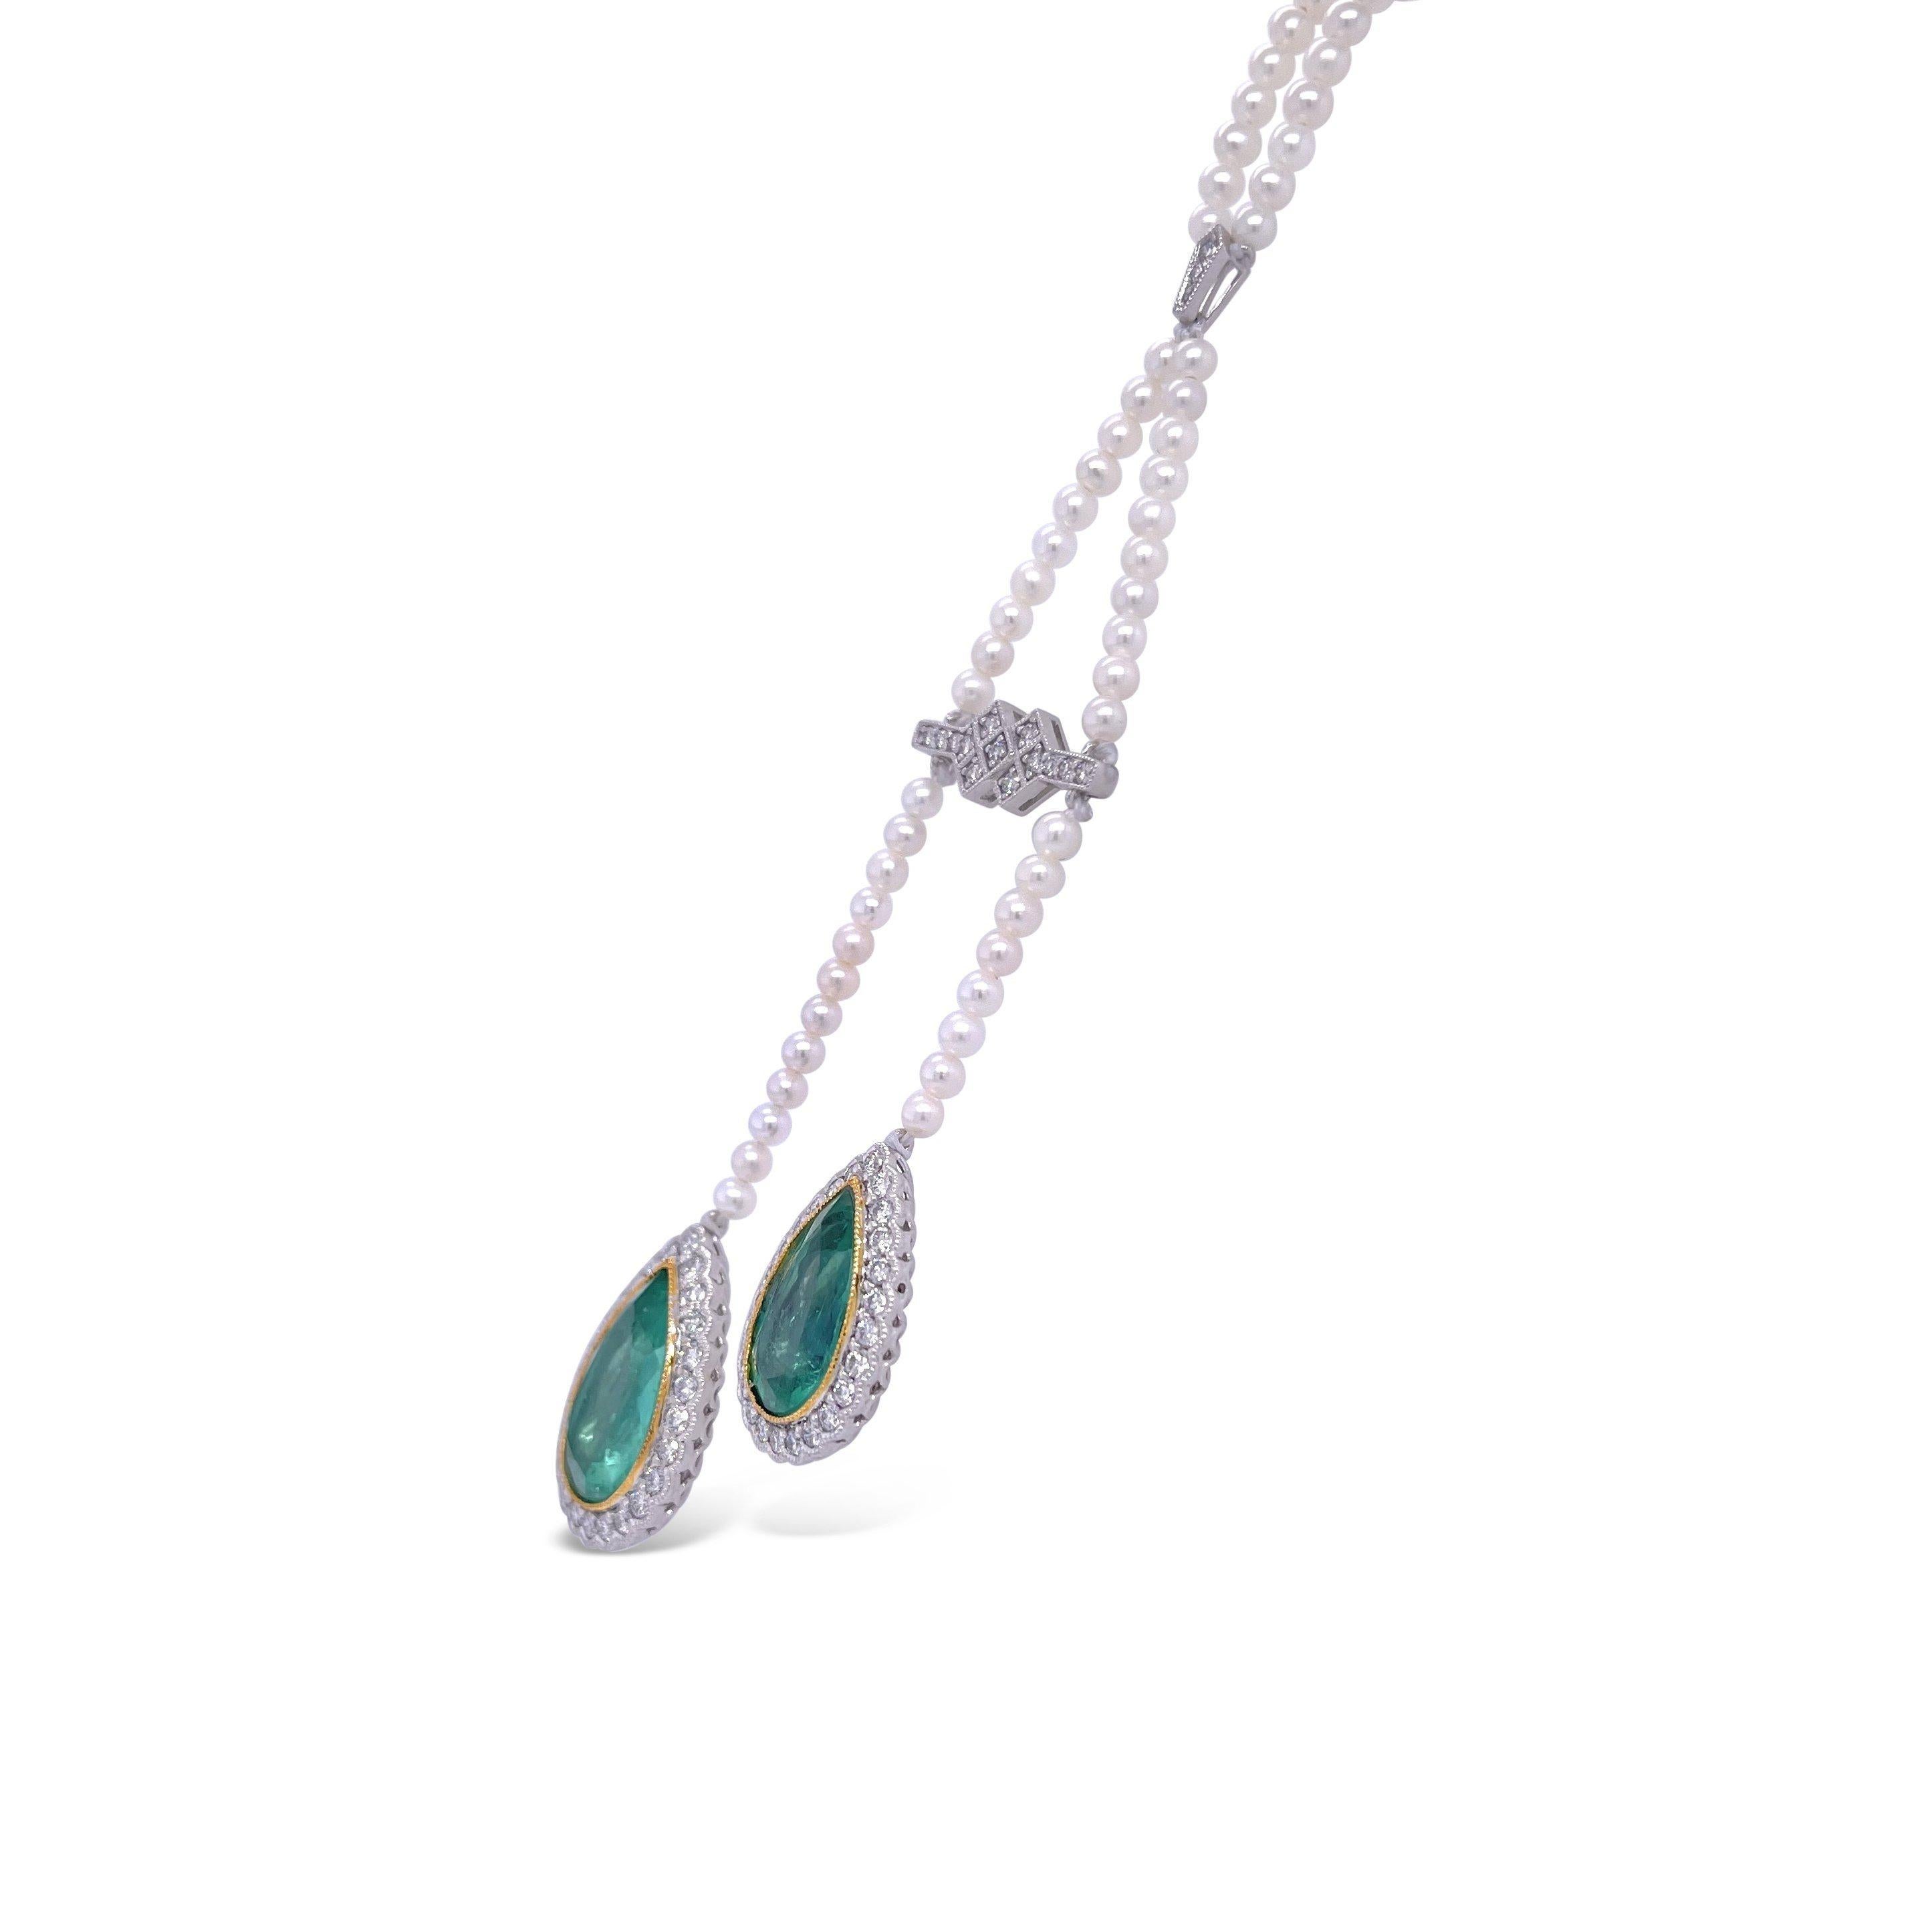 Platinum pear cut double drop emerald pendant, single strand necklet semi round cultured medium cream pearls featuring a beautiful selection of sixty-six claw and rub over set round brilliant cut diamonds, complimented by a polished finished design